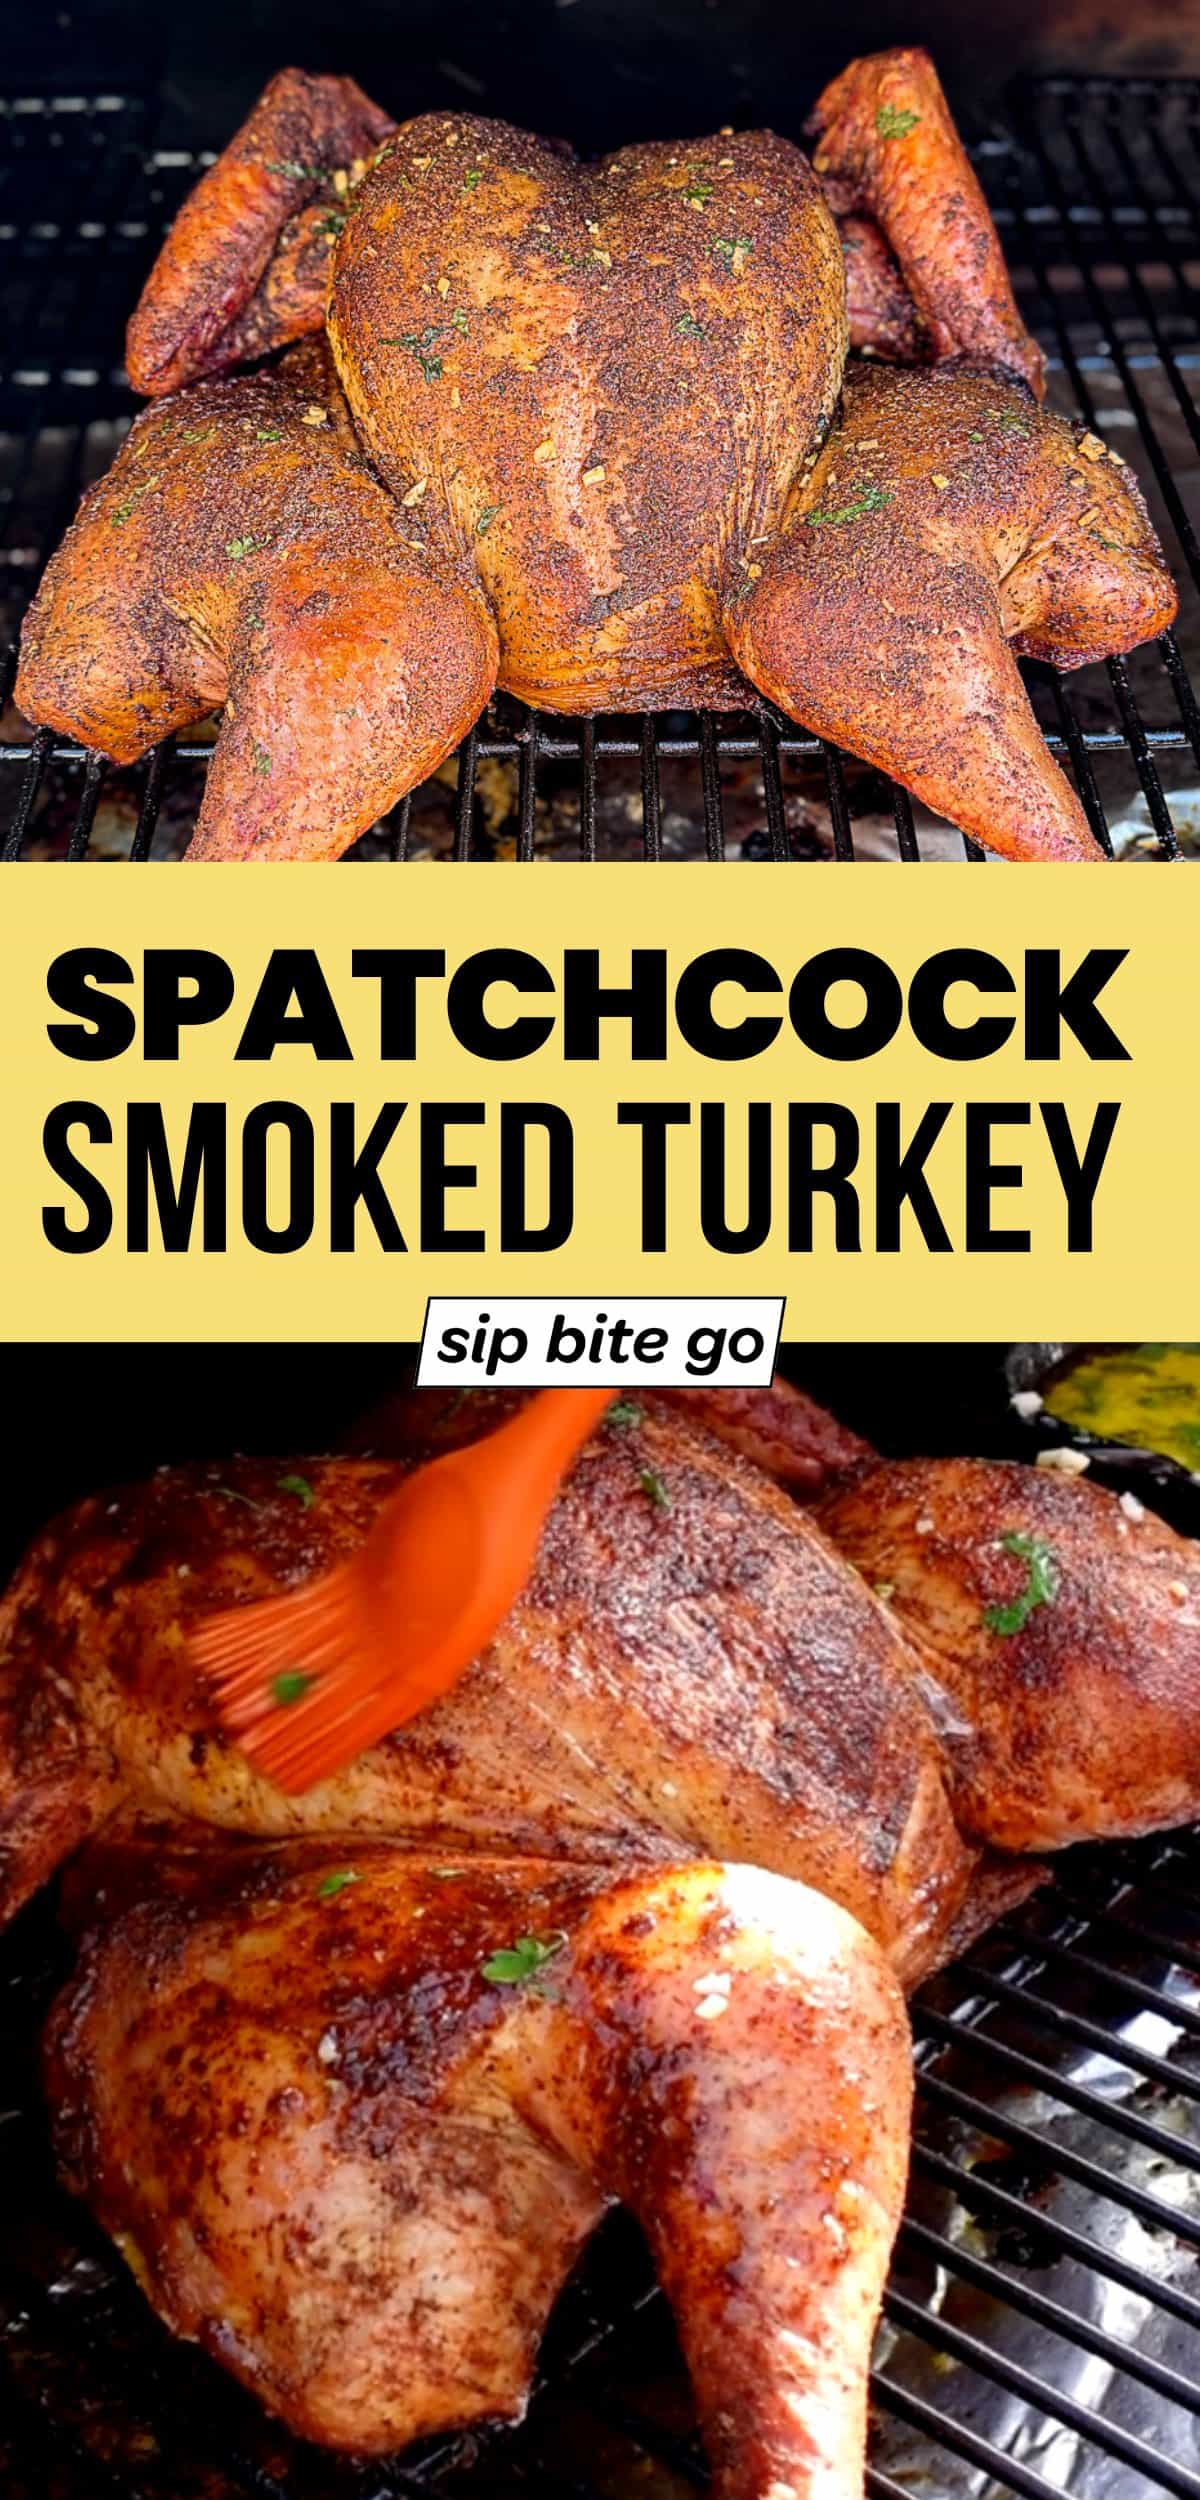 Spatchcock Smoked Turkey Recipe with text overlay